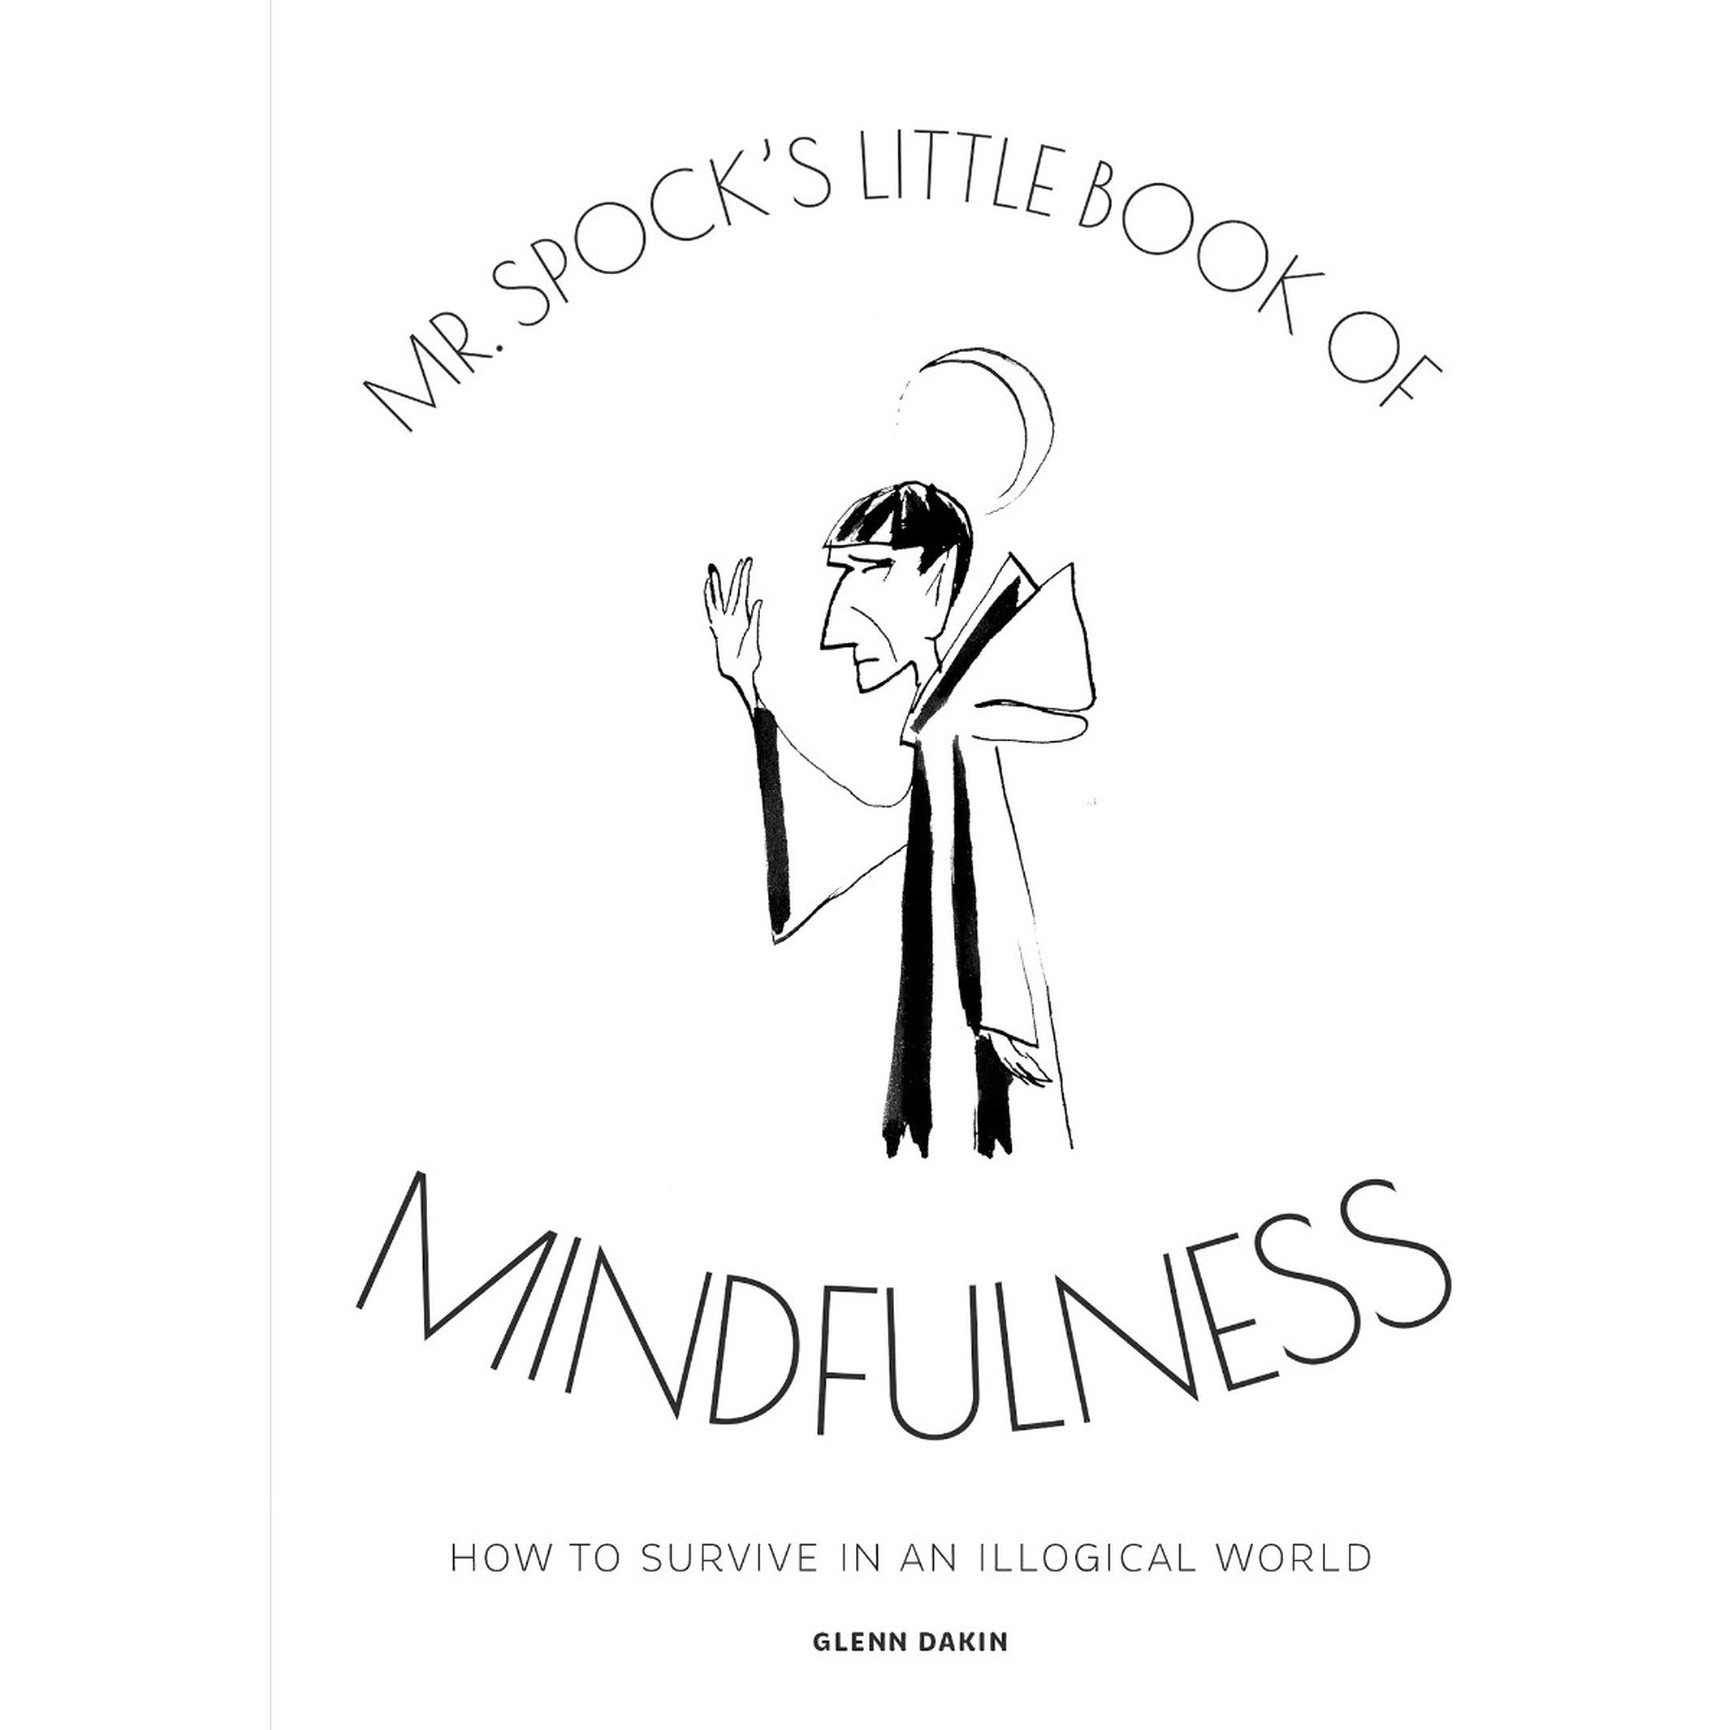 Mr. Spock's Little Book of Mindfulness: How to Survive in an Illogical World